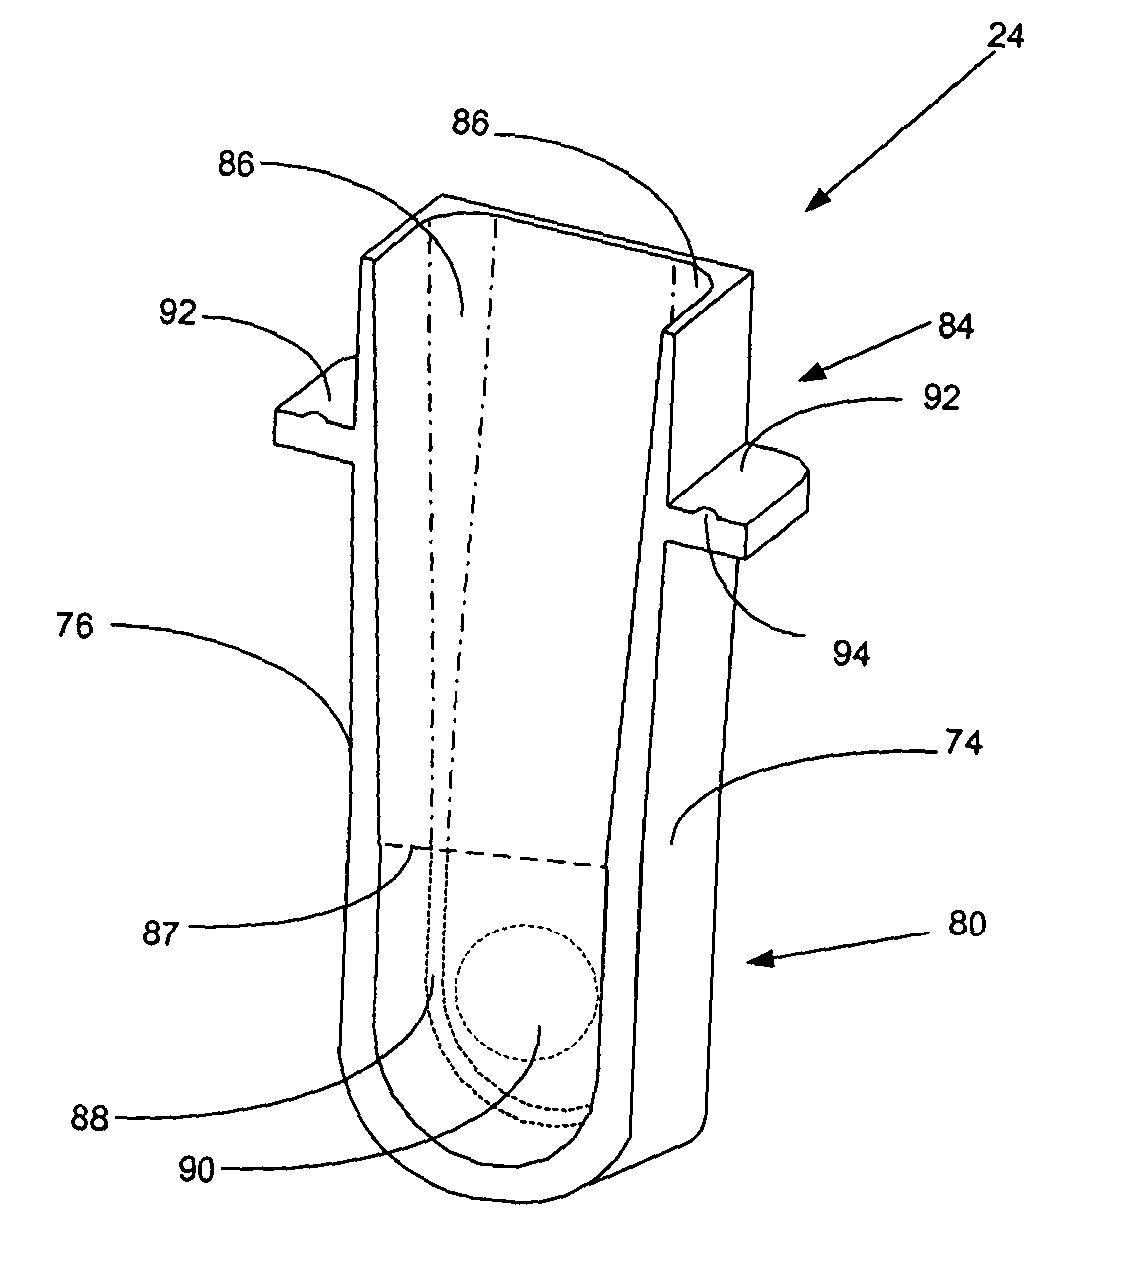 Reaction cuvette having anti-wicking features for use in an automatic clinical analyzer